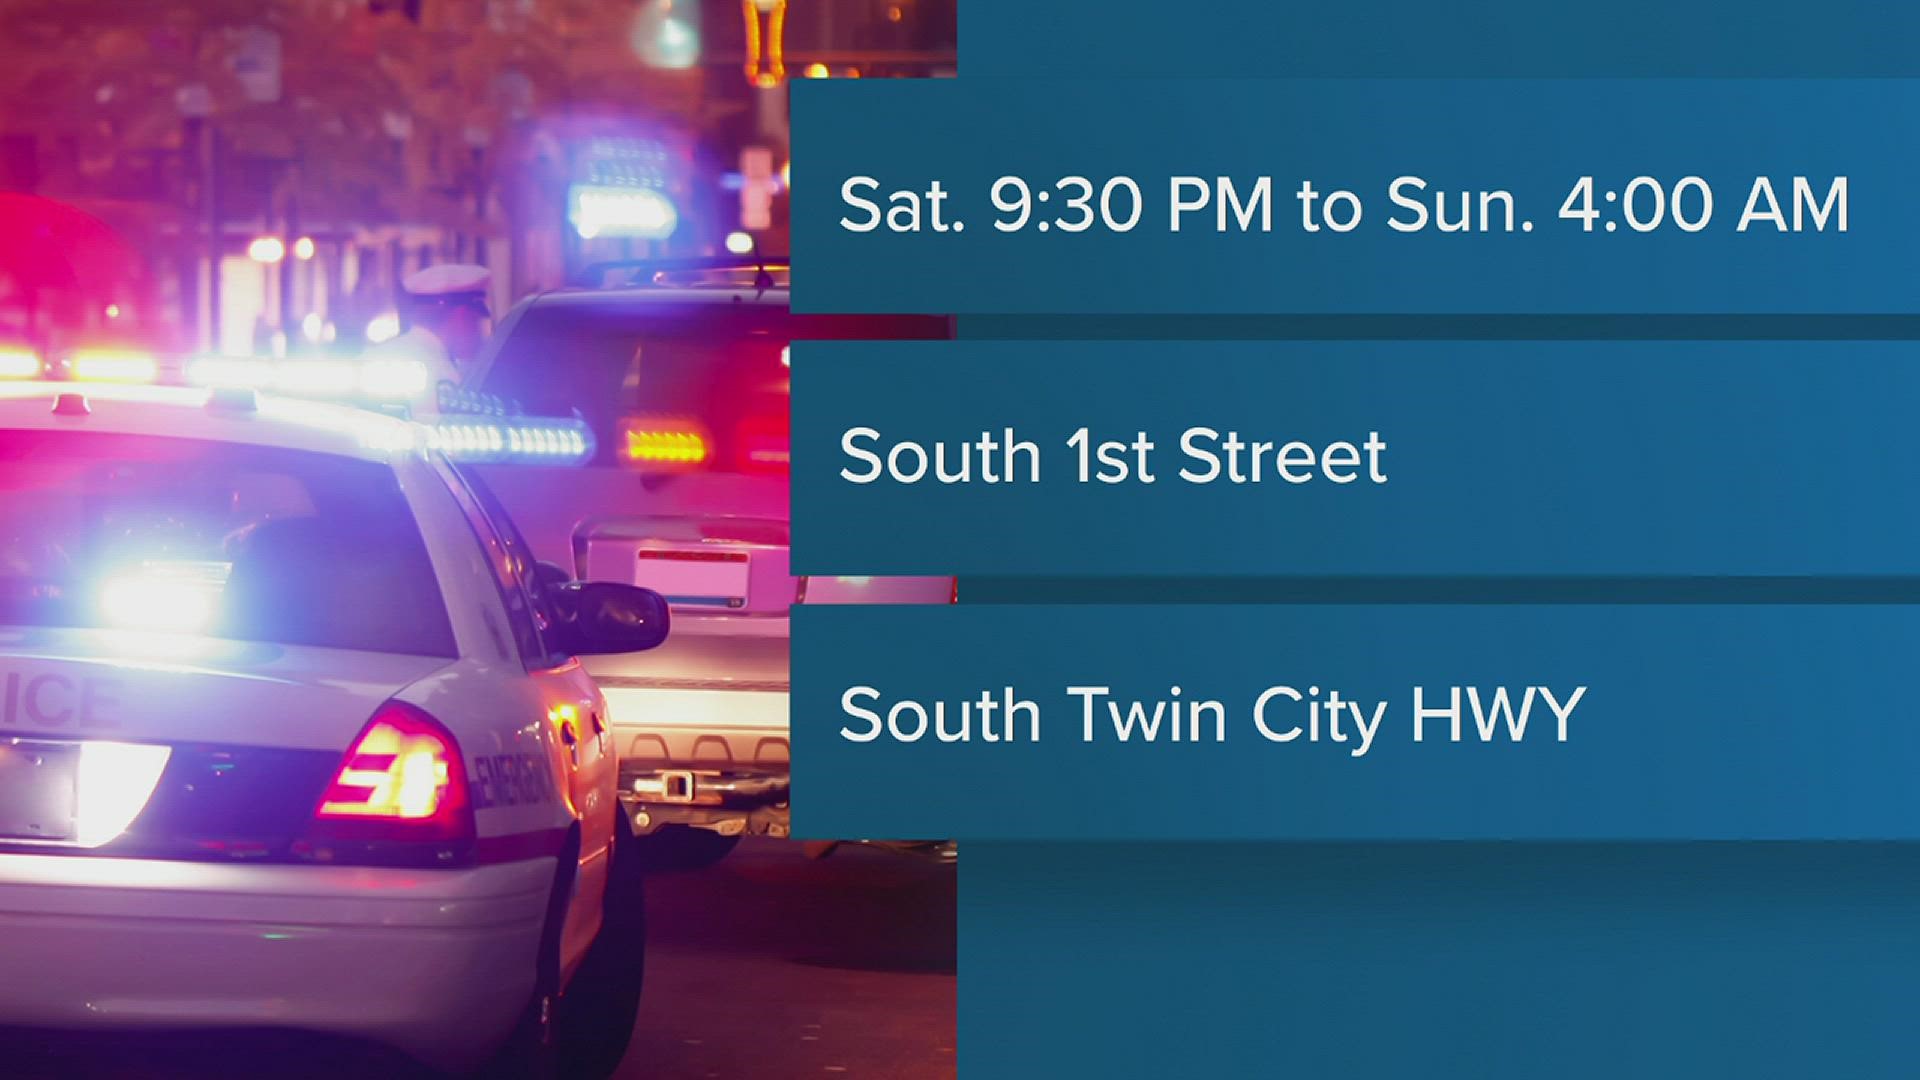 The incidents took place between South 1st Street and South Twin City.